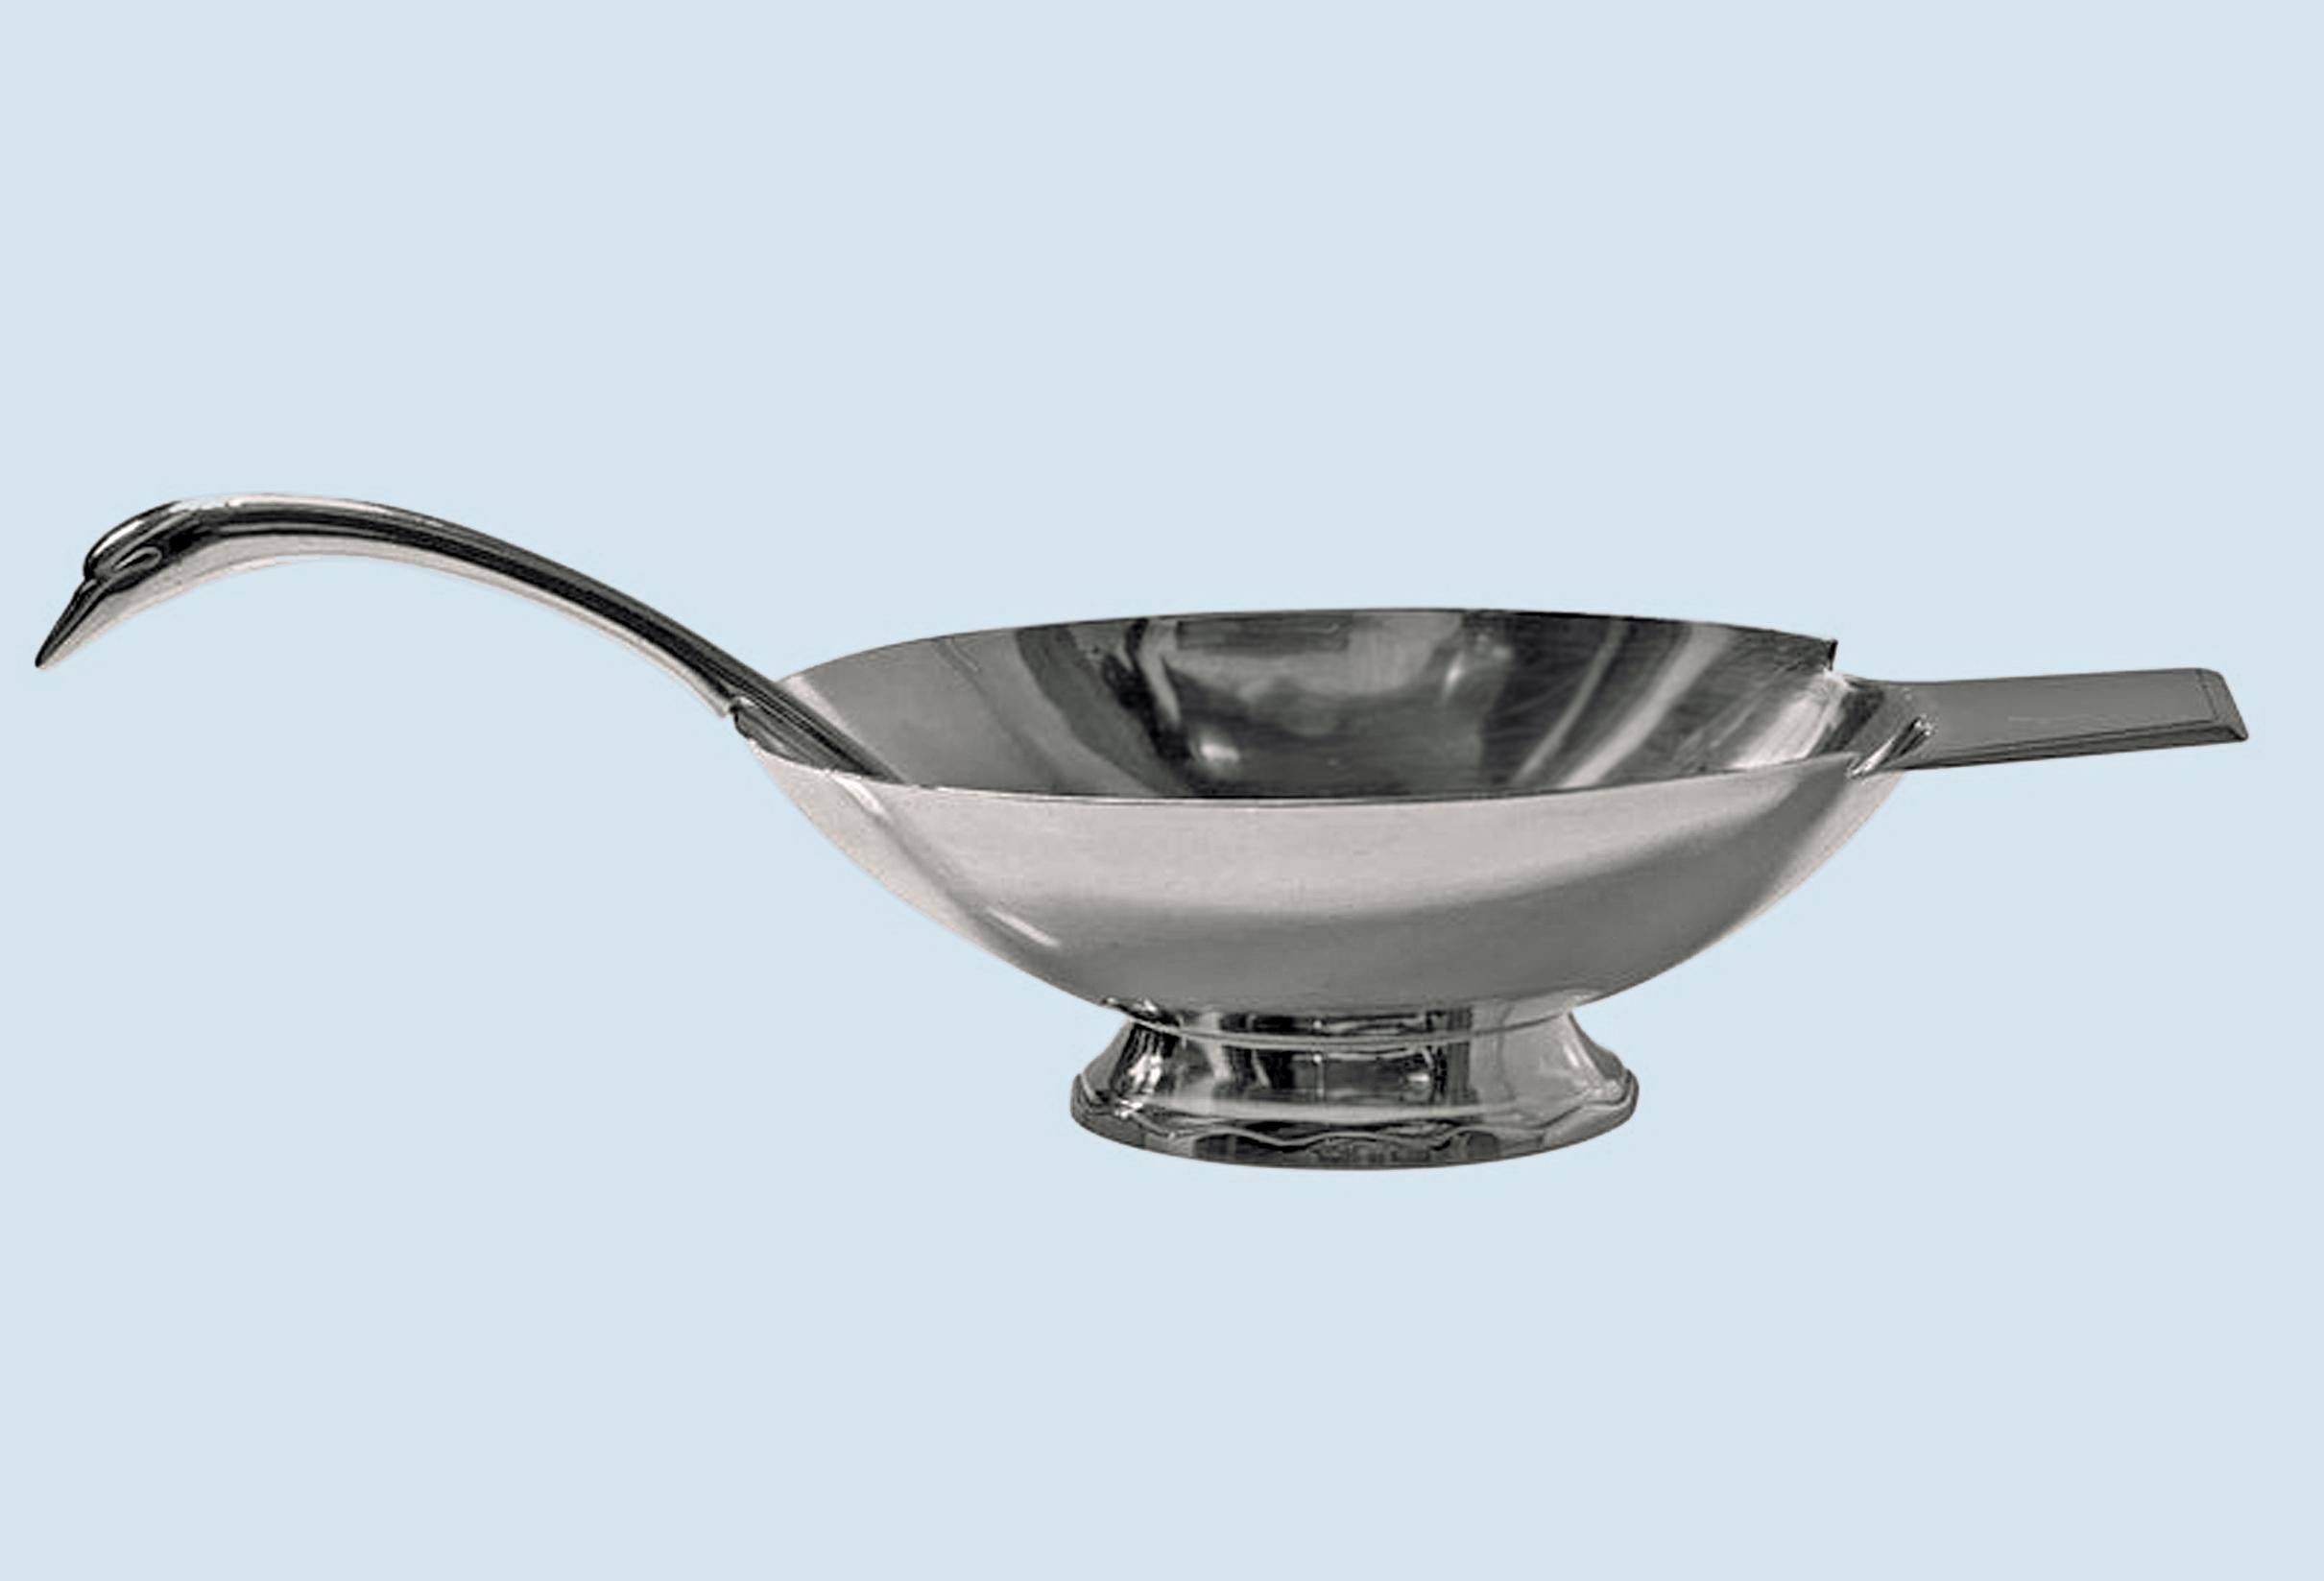 Christofle Art Deco Silver Plate Sauceboat and Ladle each conforming to the shape of a swan, designed by Christian Fjerdingstad for Christofle, France. C. 1935. The Sauceboat on oval shaped footed base with wavy design motif, plain oval shaped body